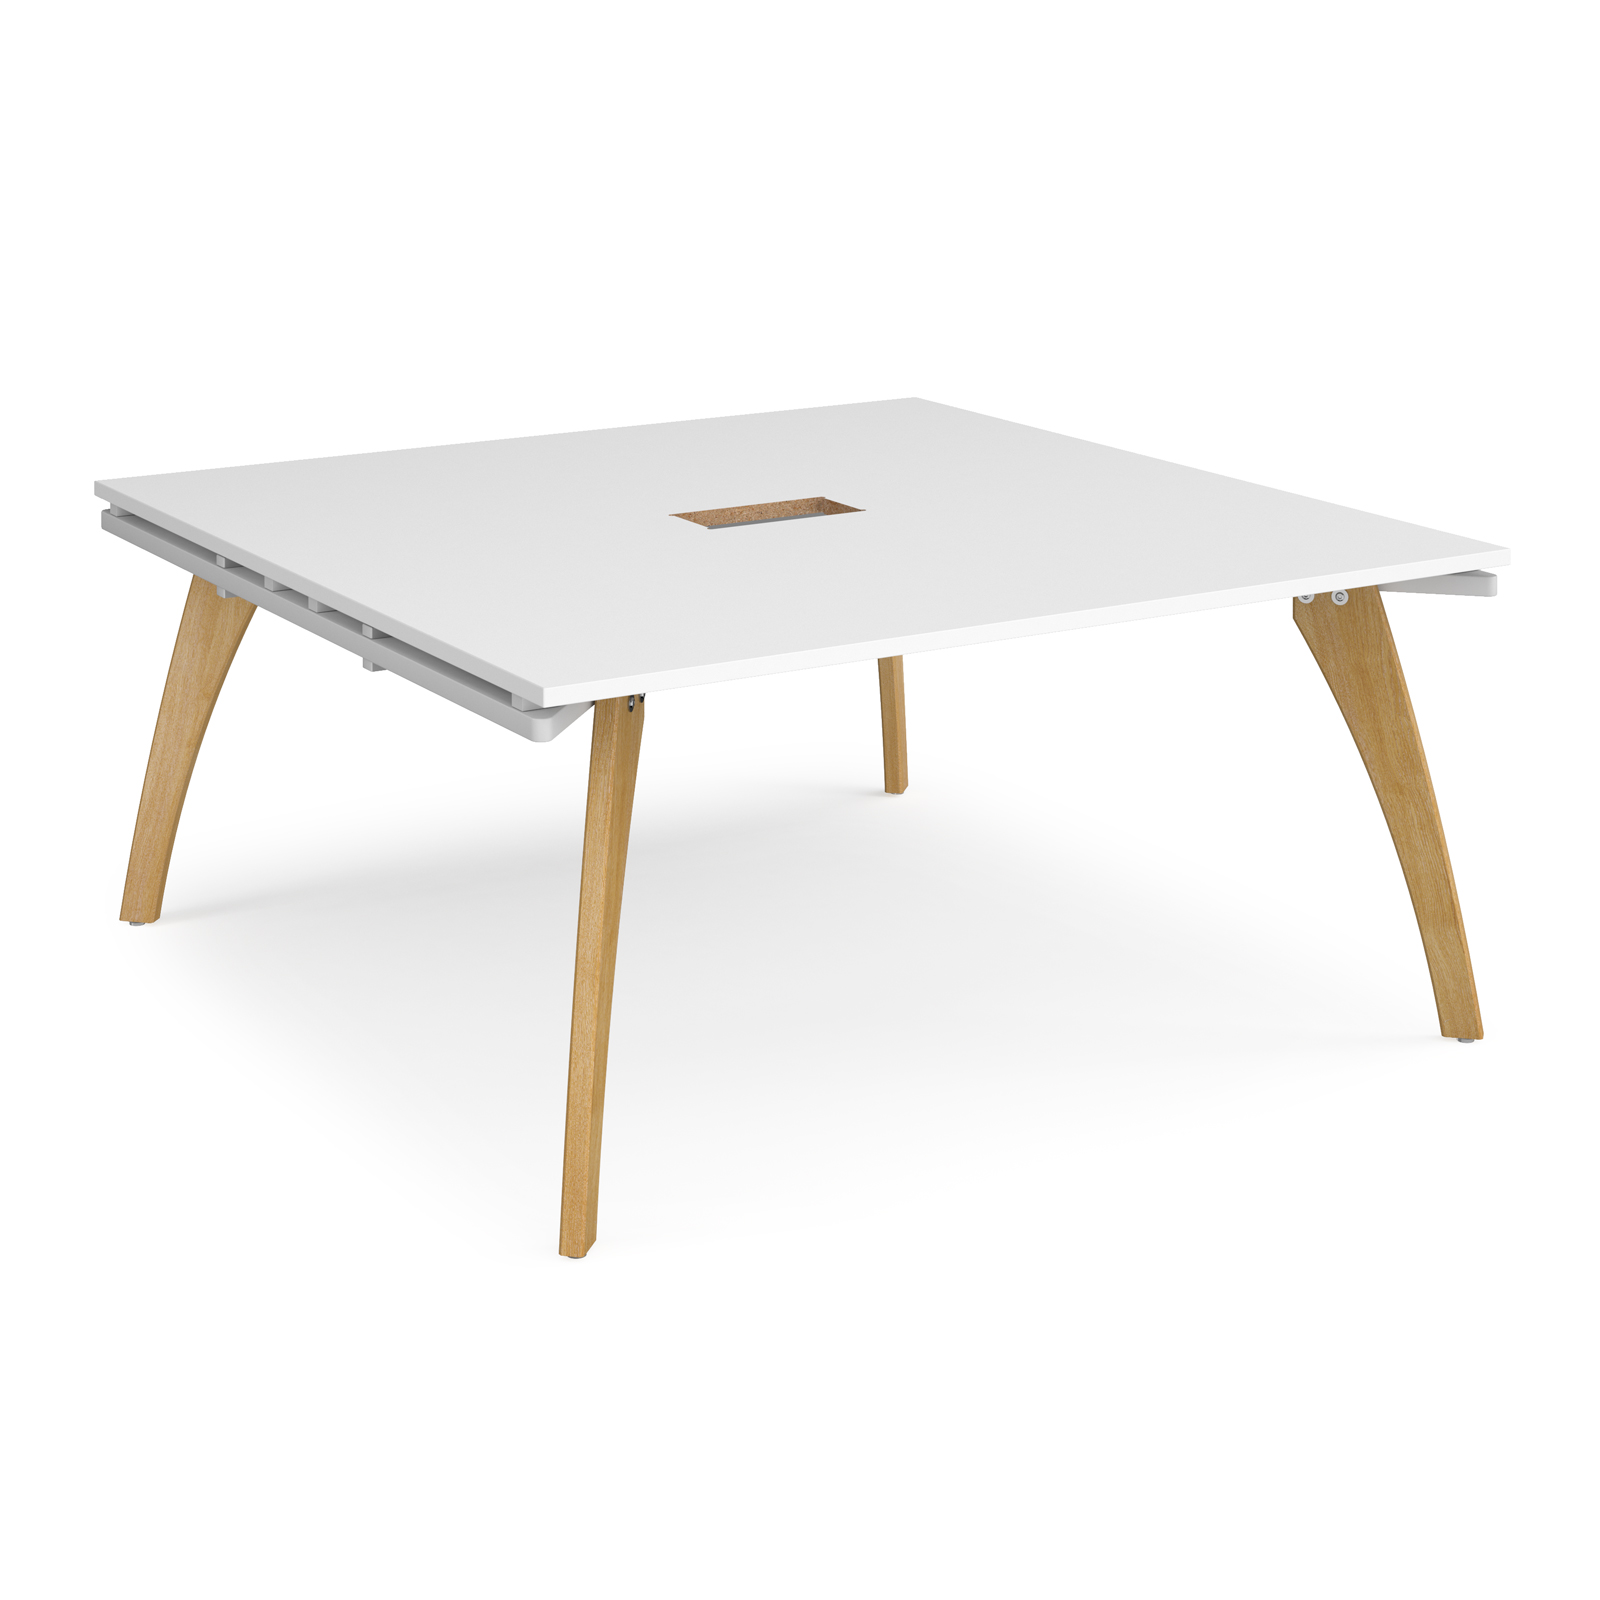 Fuze square boardroom table 1600mm x 1600mm with central cutout 272mm x 132mm - white frame, white top